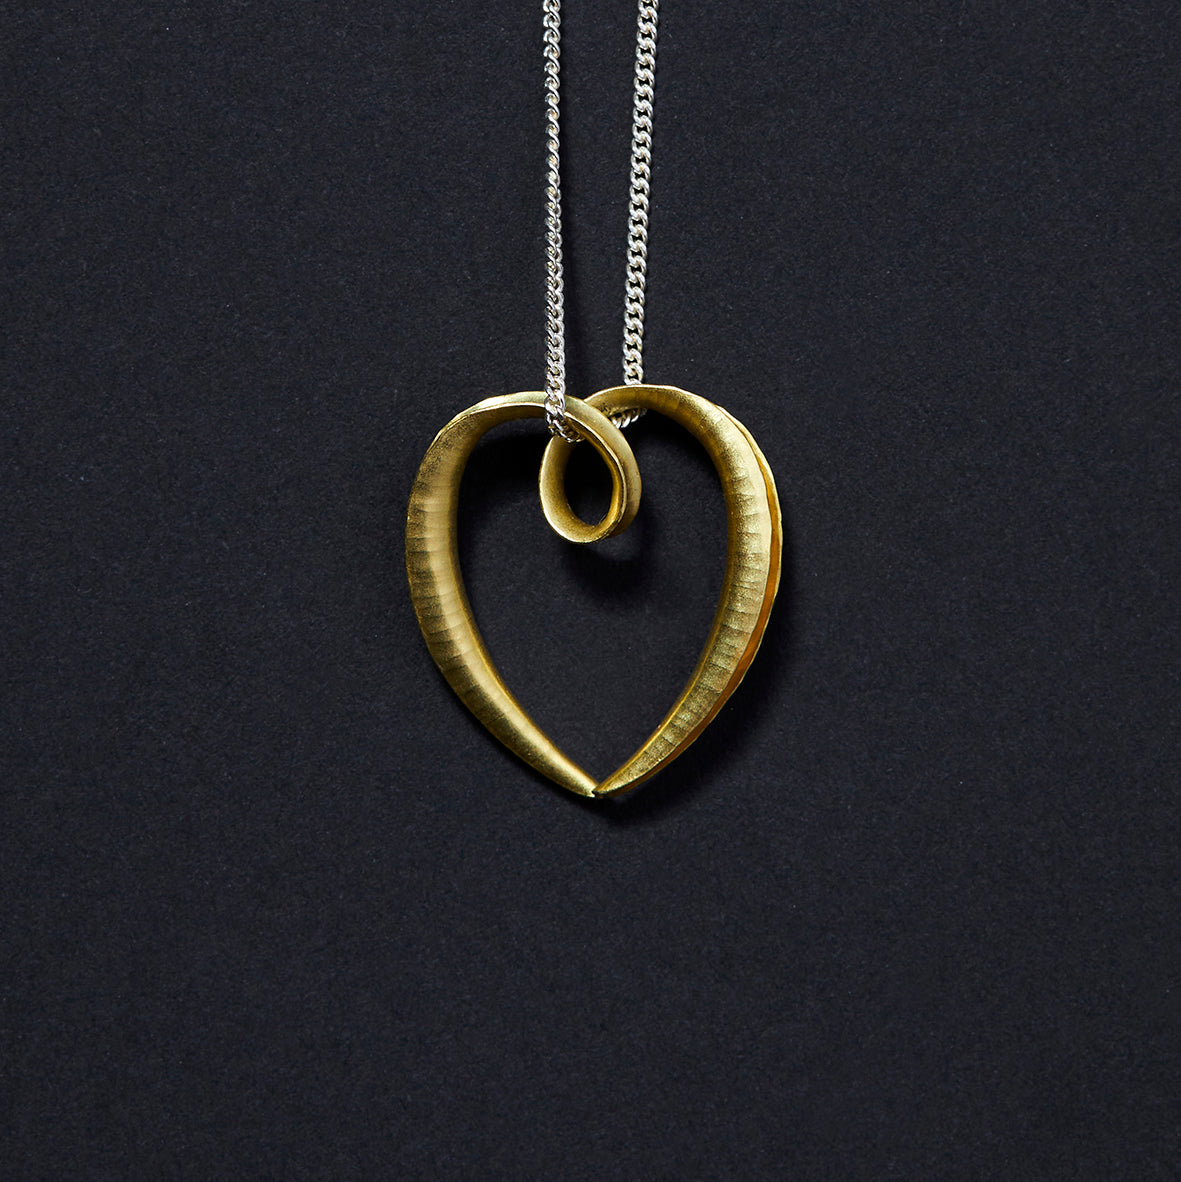 A small 18 carat heart pendant made from a single piece of metal, formed into a sort of tapered tube with the outer side open and gold plated on the inside surface for contrast. It is formed into a loop at the top which the chain passes through.